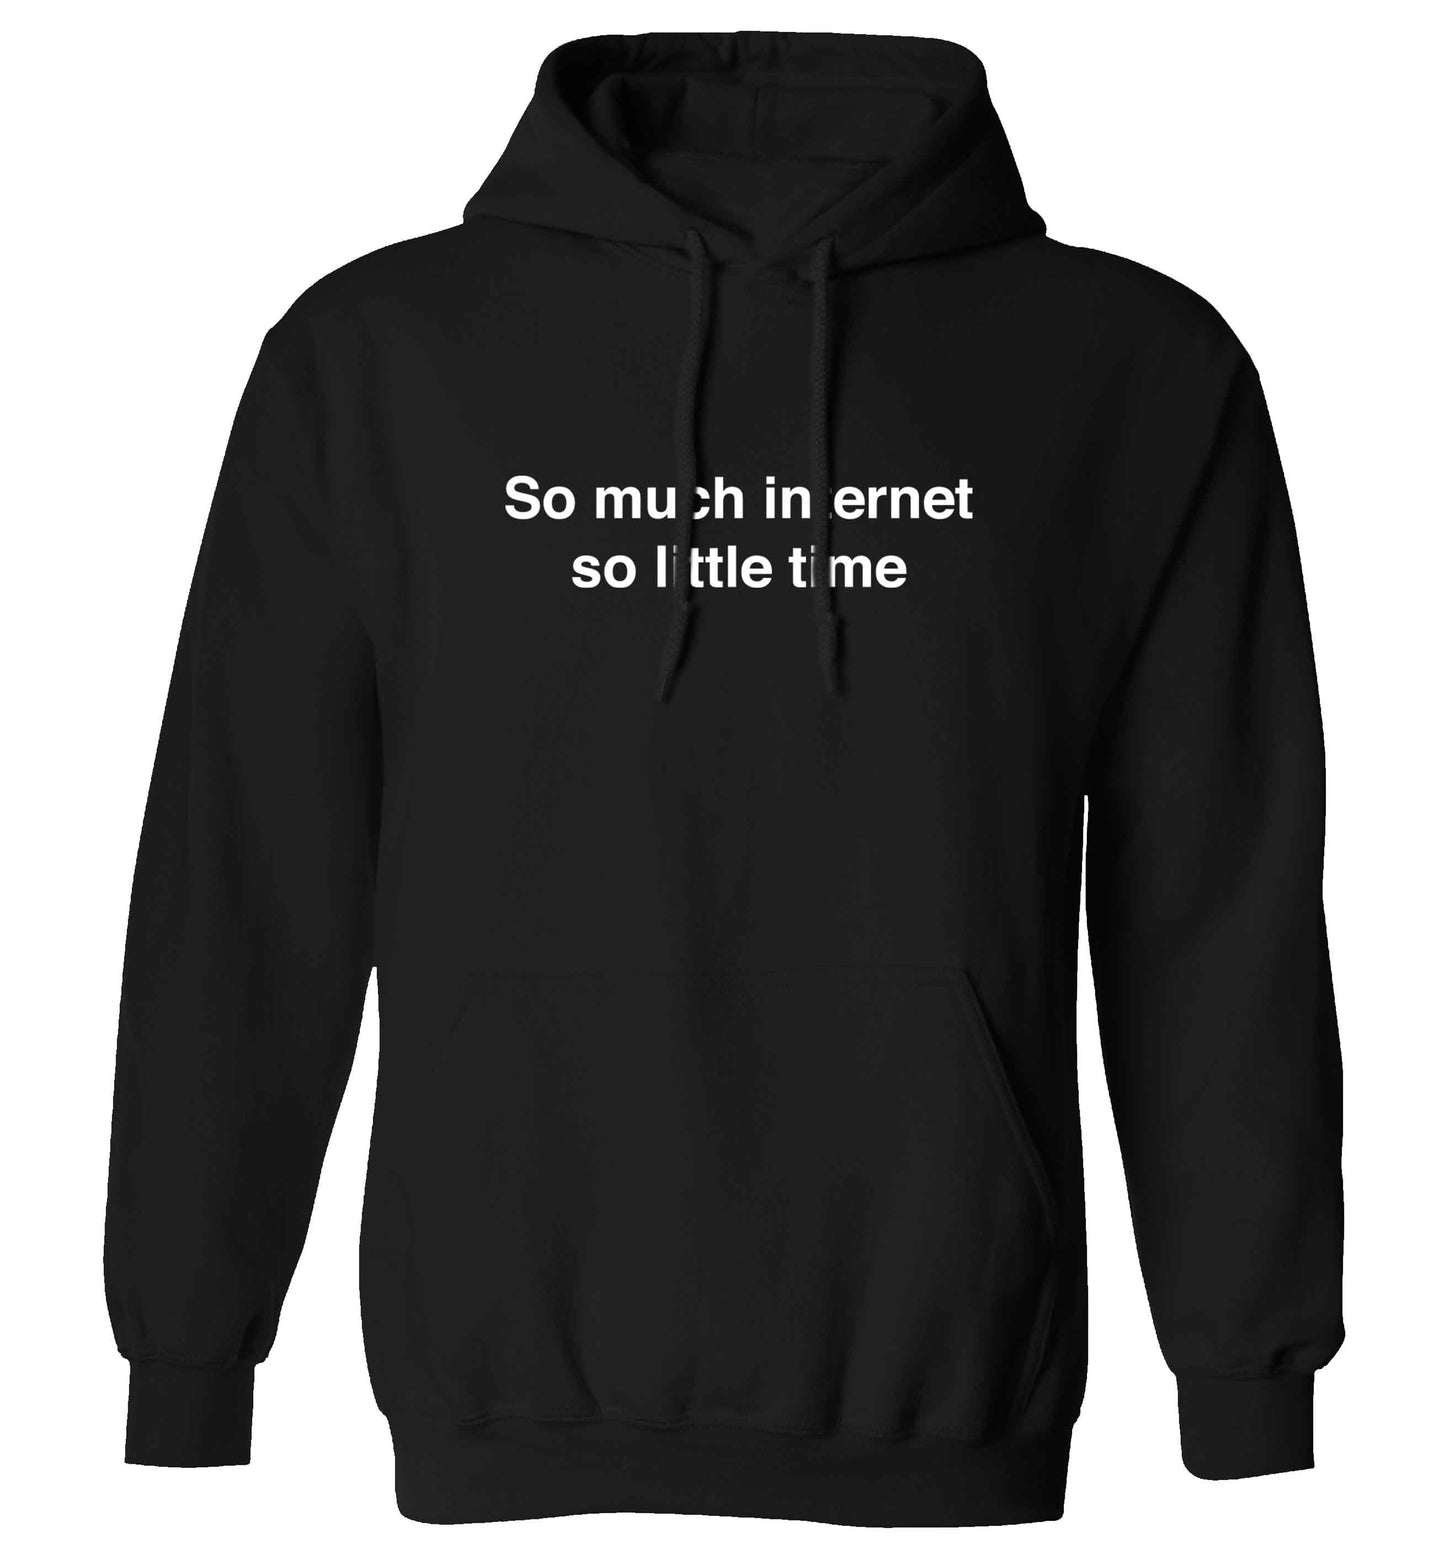 So much internet so little time adults unisex black hoodie 2XL